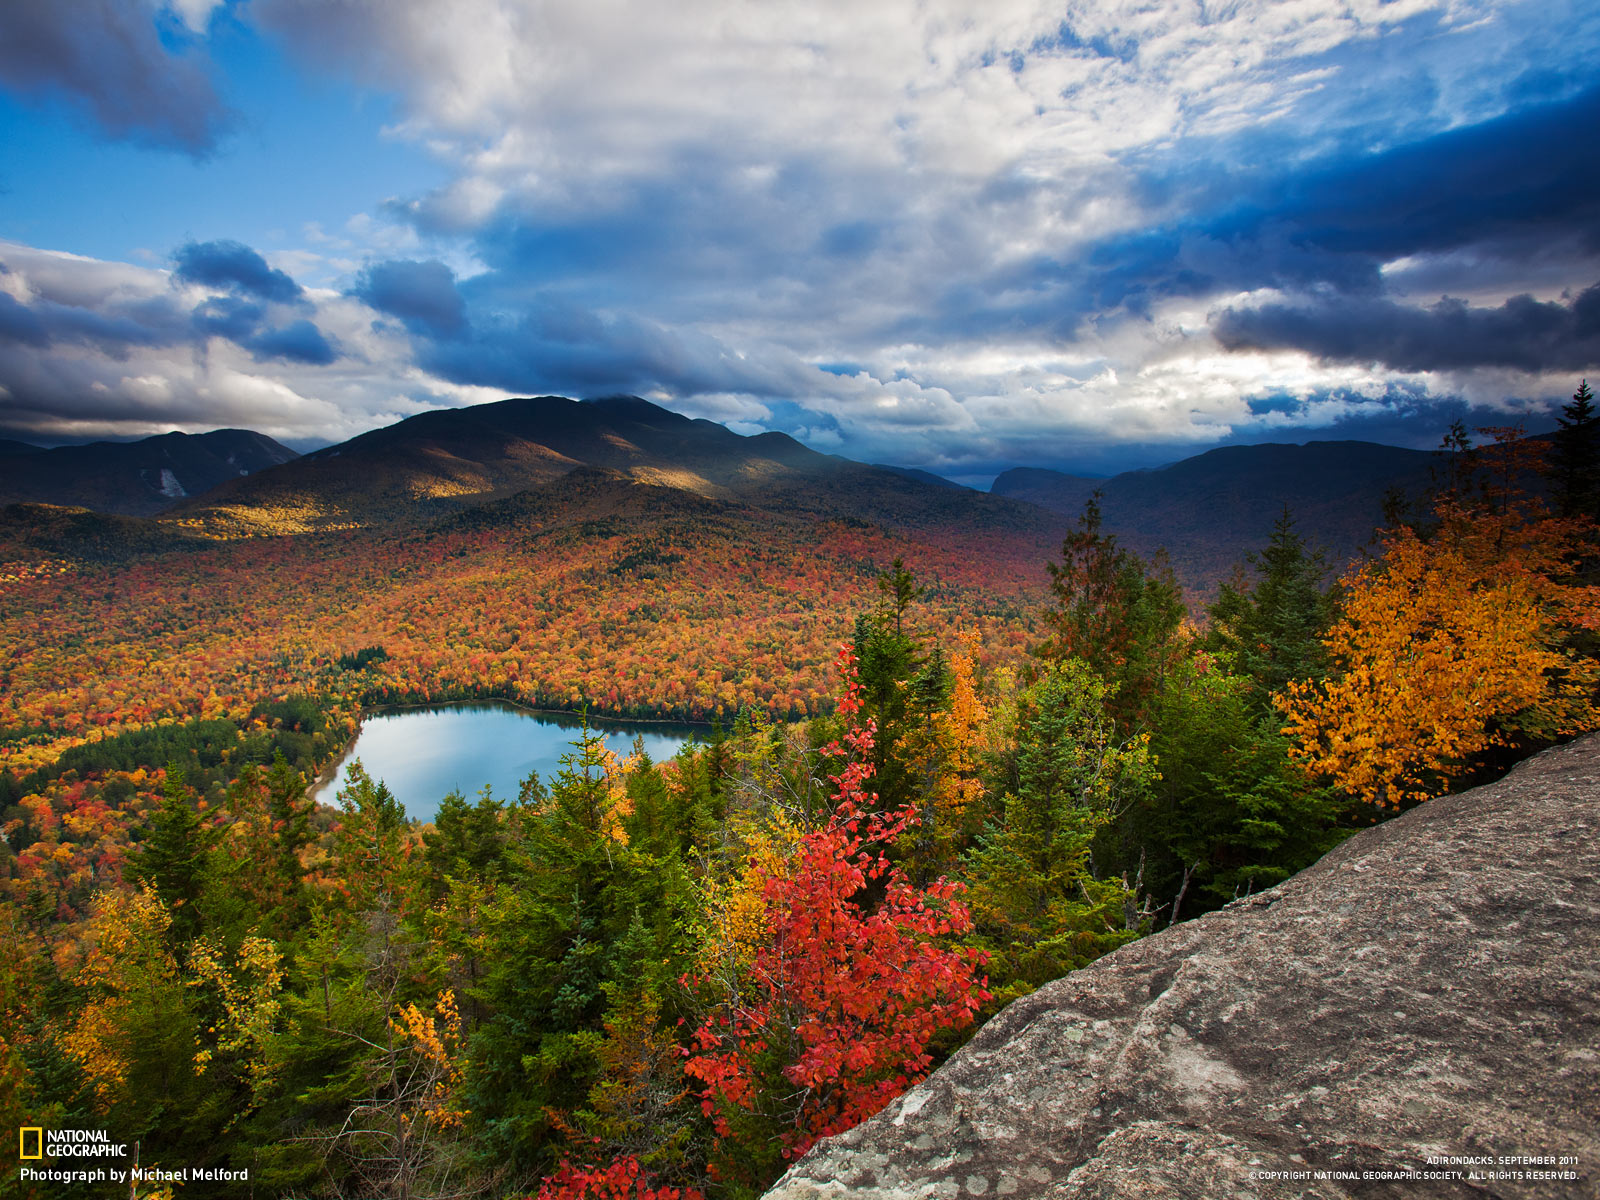 Adirondack Park   Photo Gallery   Pictures More From National